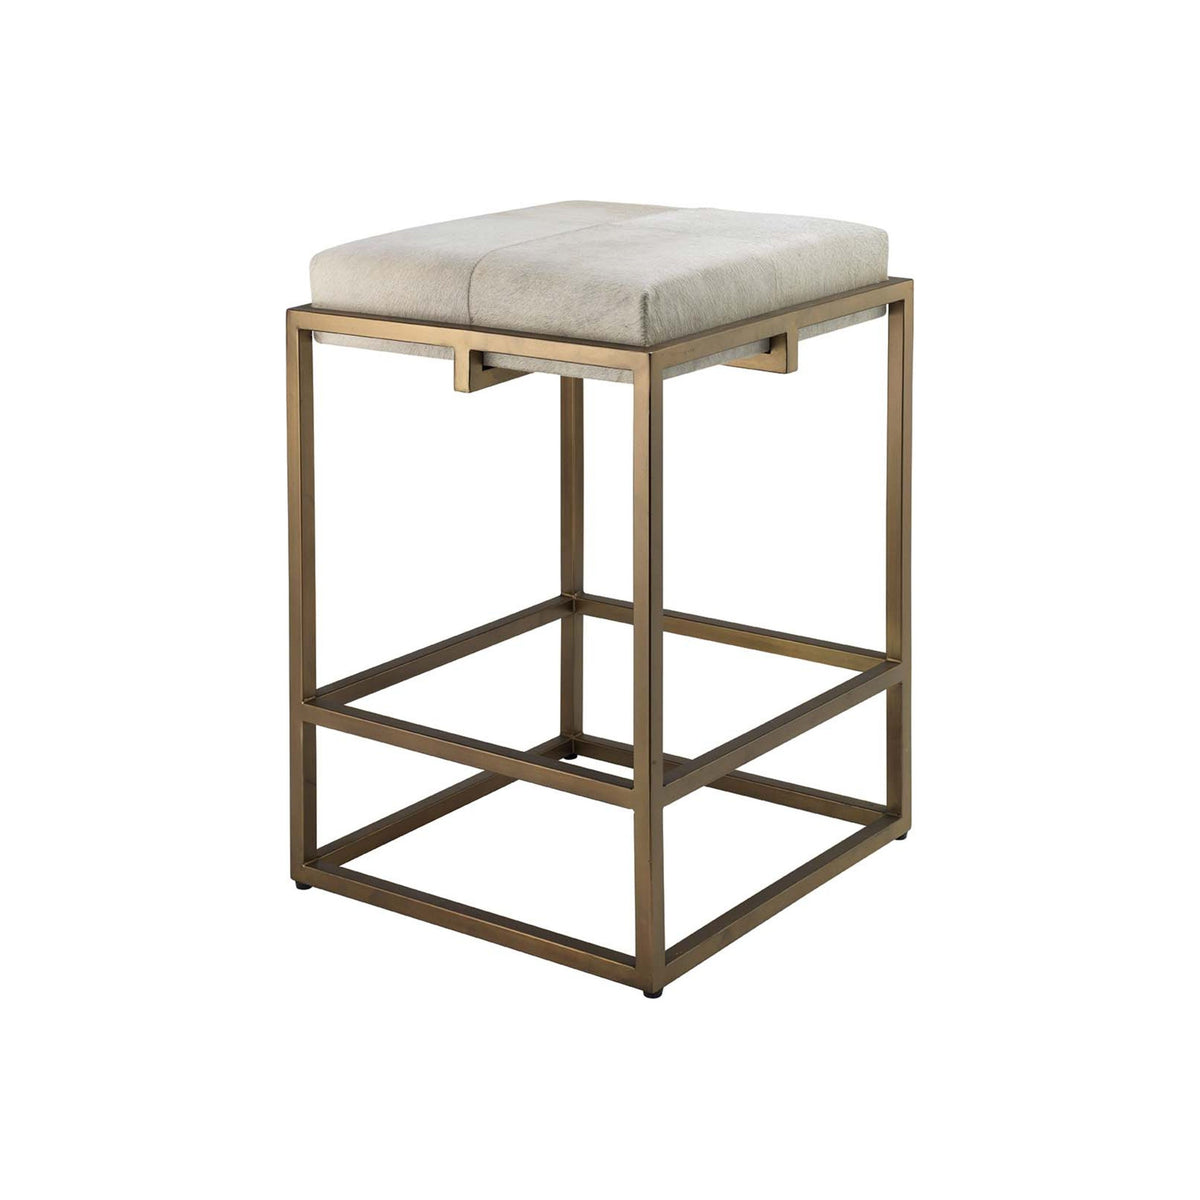 Jamie Young Company - 20SHEL-CSWH - Shelby Counter Stool - Shelby - White